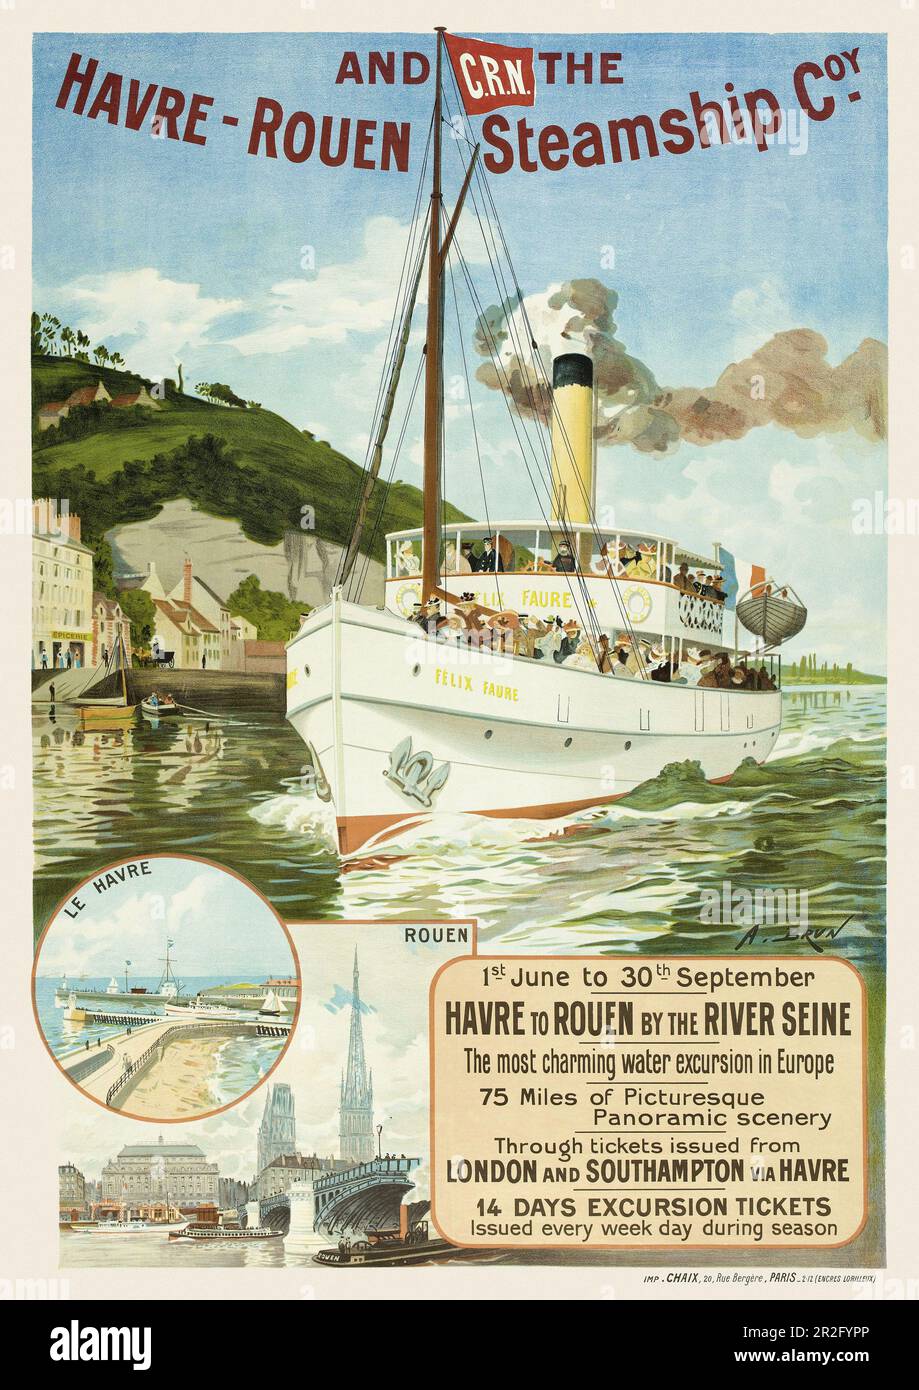 London and South Western Railway and the Havre-Rouen Steamship Coy. by Abel Brun (dates unknown. Poster published in 1895 in France. Stock Photo